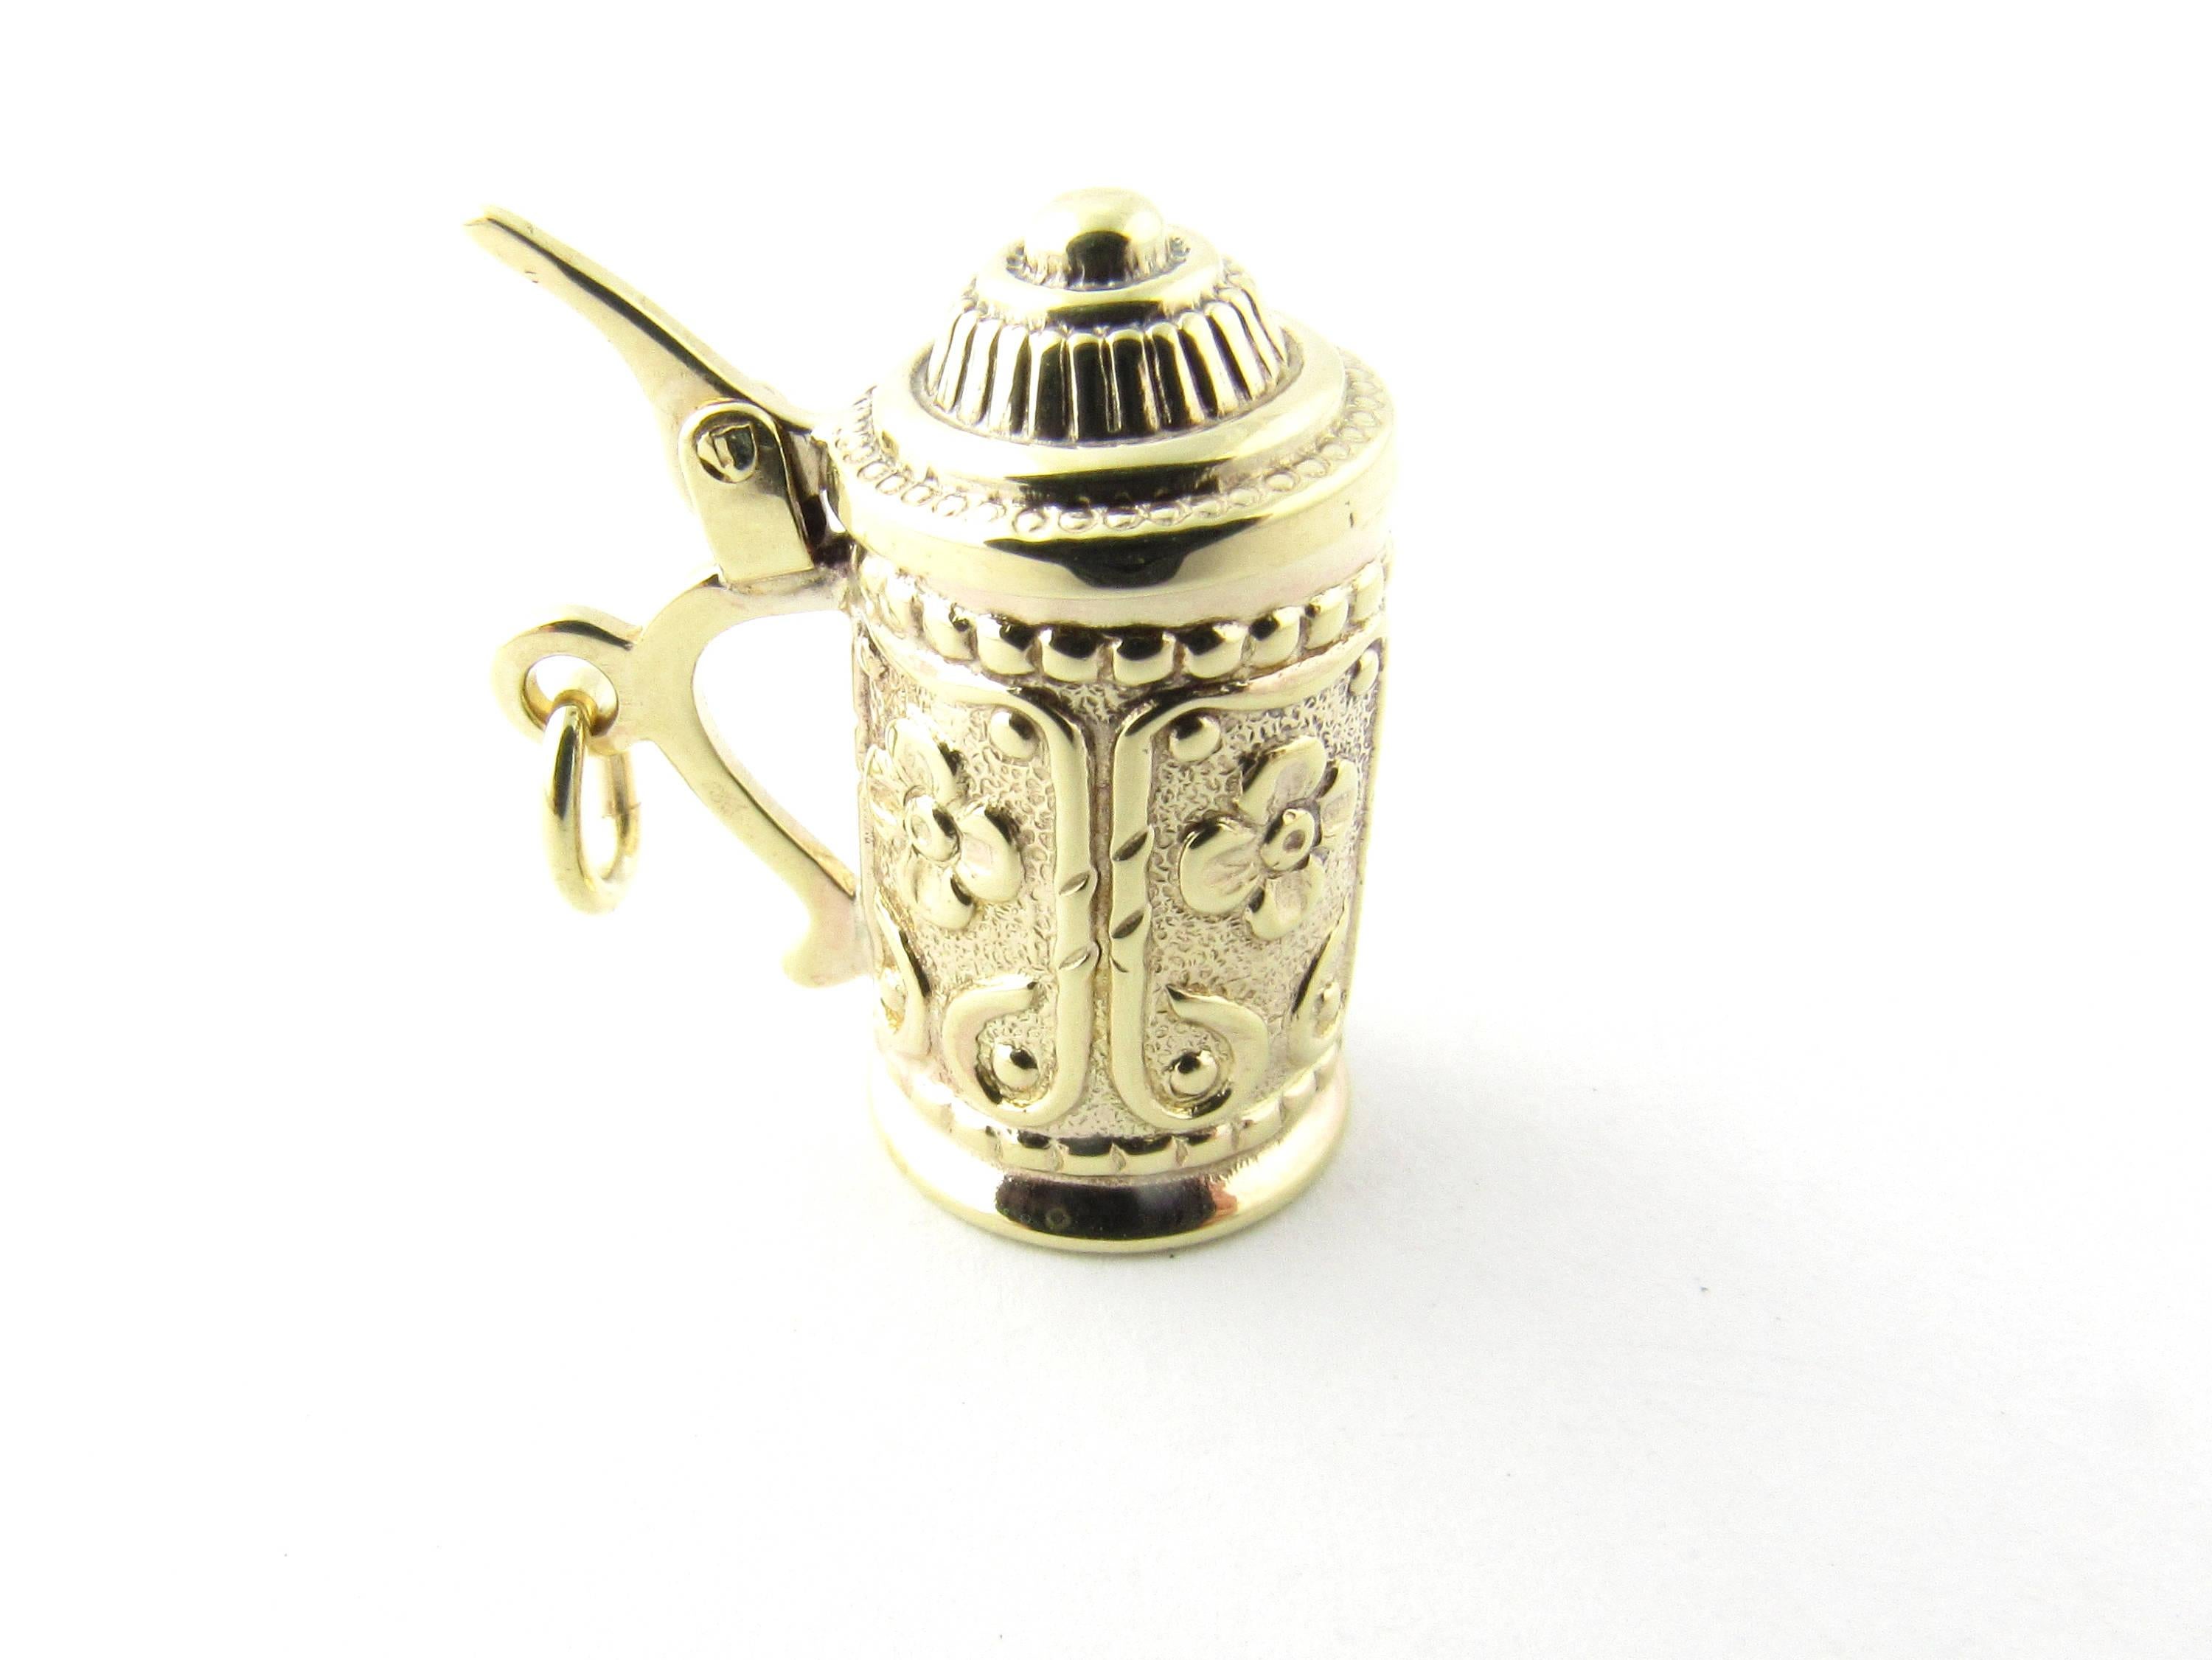 Vintage 8 Karat Yellow Gold Beer Stein Charm-

Raise your glasses!

This lovely charm features a 3D beer stein with hinged lid. Decorated with a lovely floral design.

Size: 21 mm x 18 mm (actual charm)

Weight: 1.6 dwt. / 2.5 gr.

Hallmark: